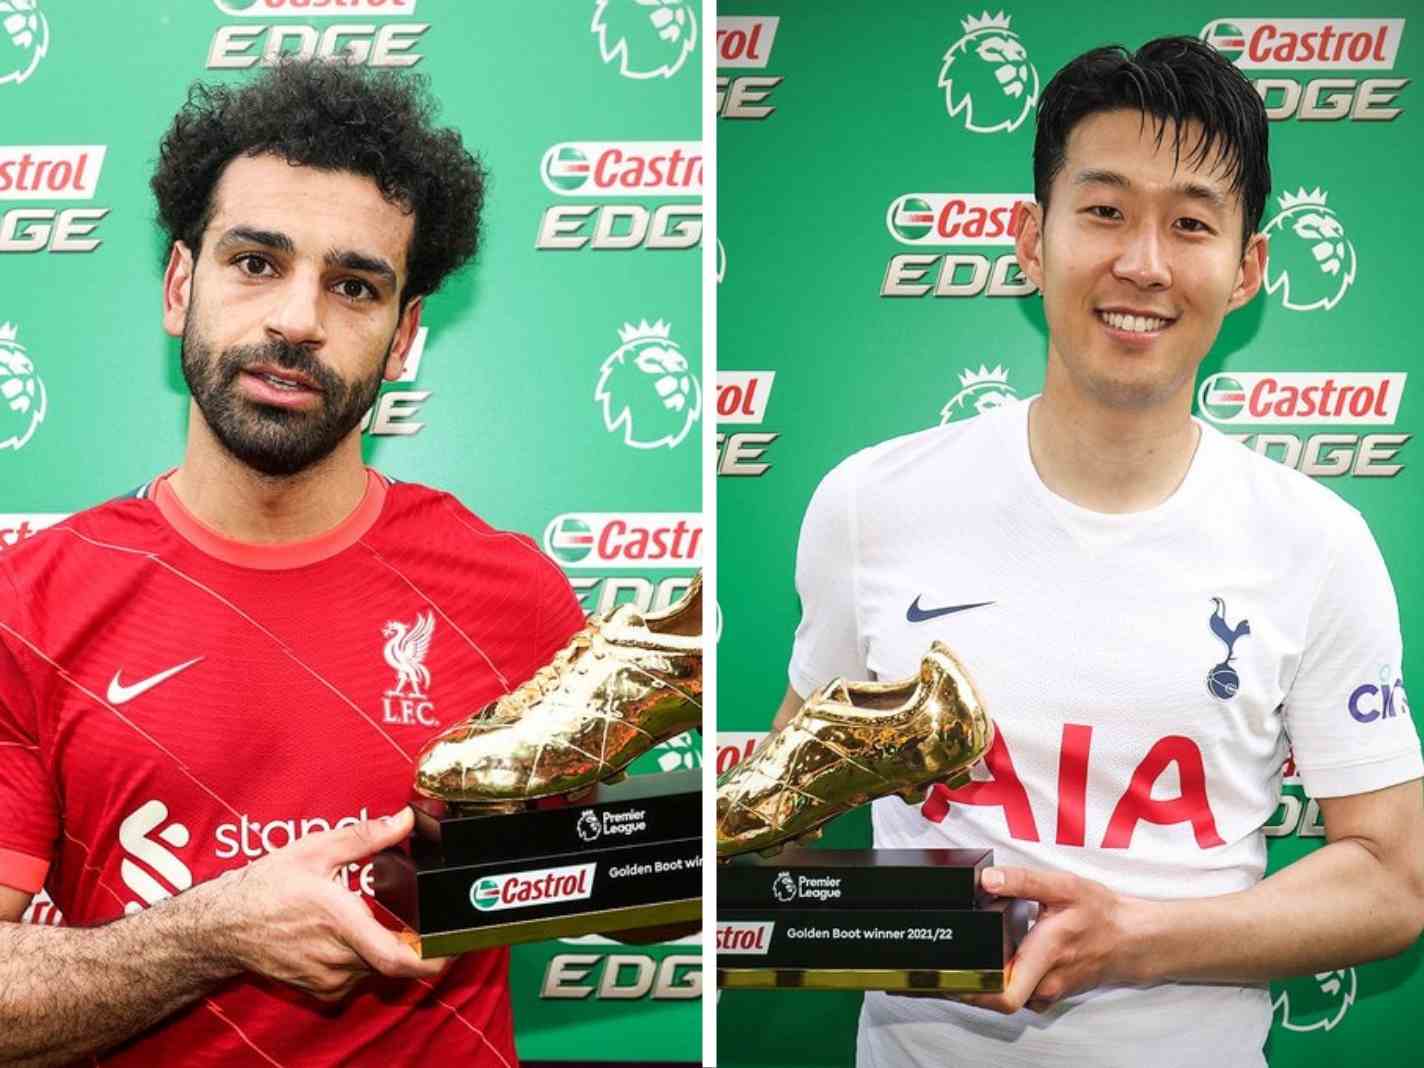 The photo shows Mohamed Salah and Son Heung-min with their Golden Boot awards